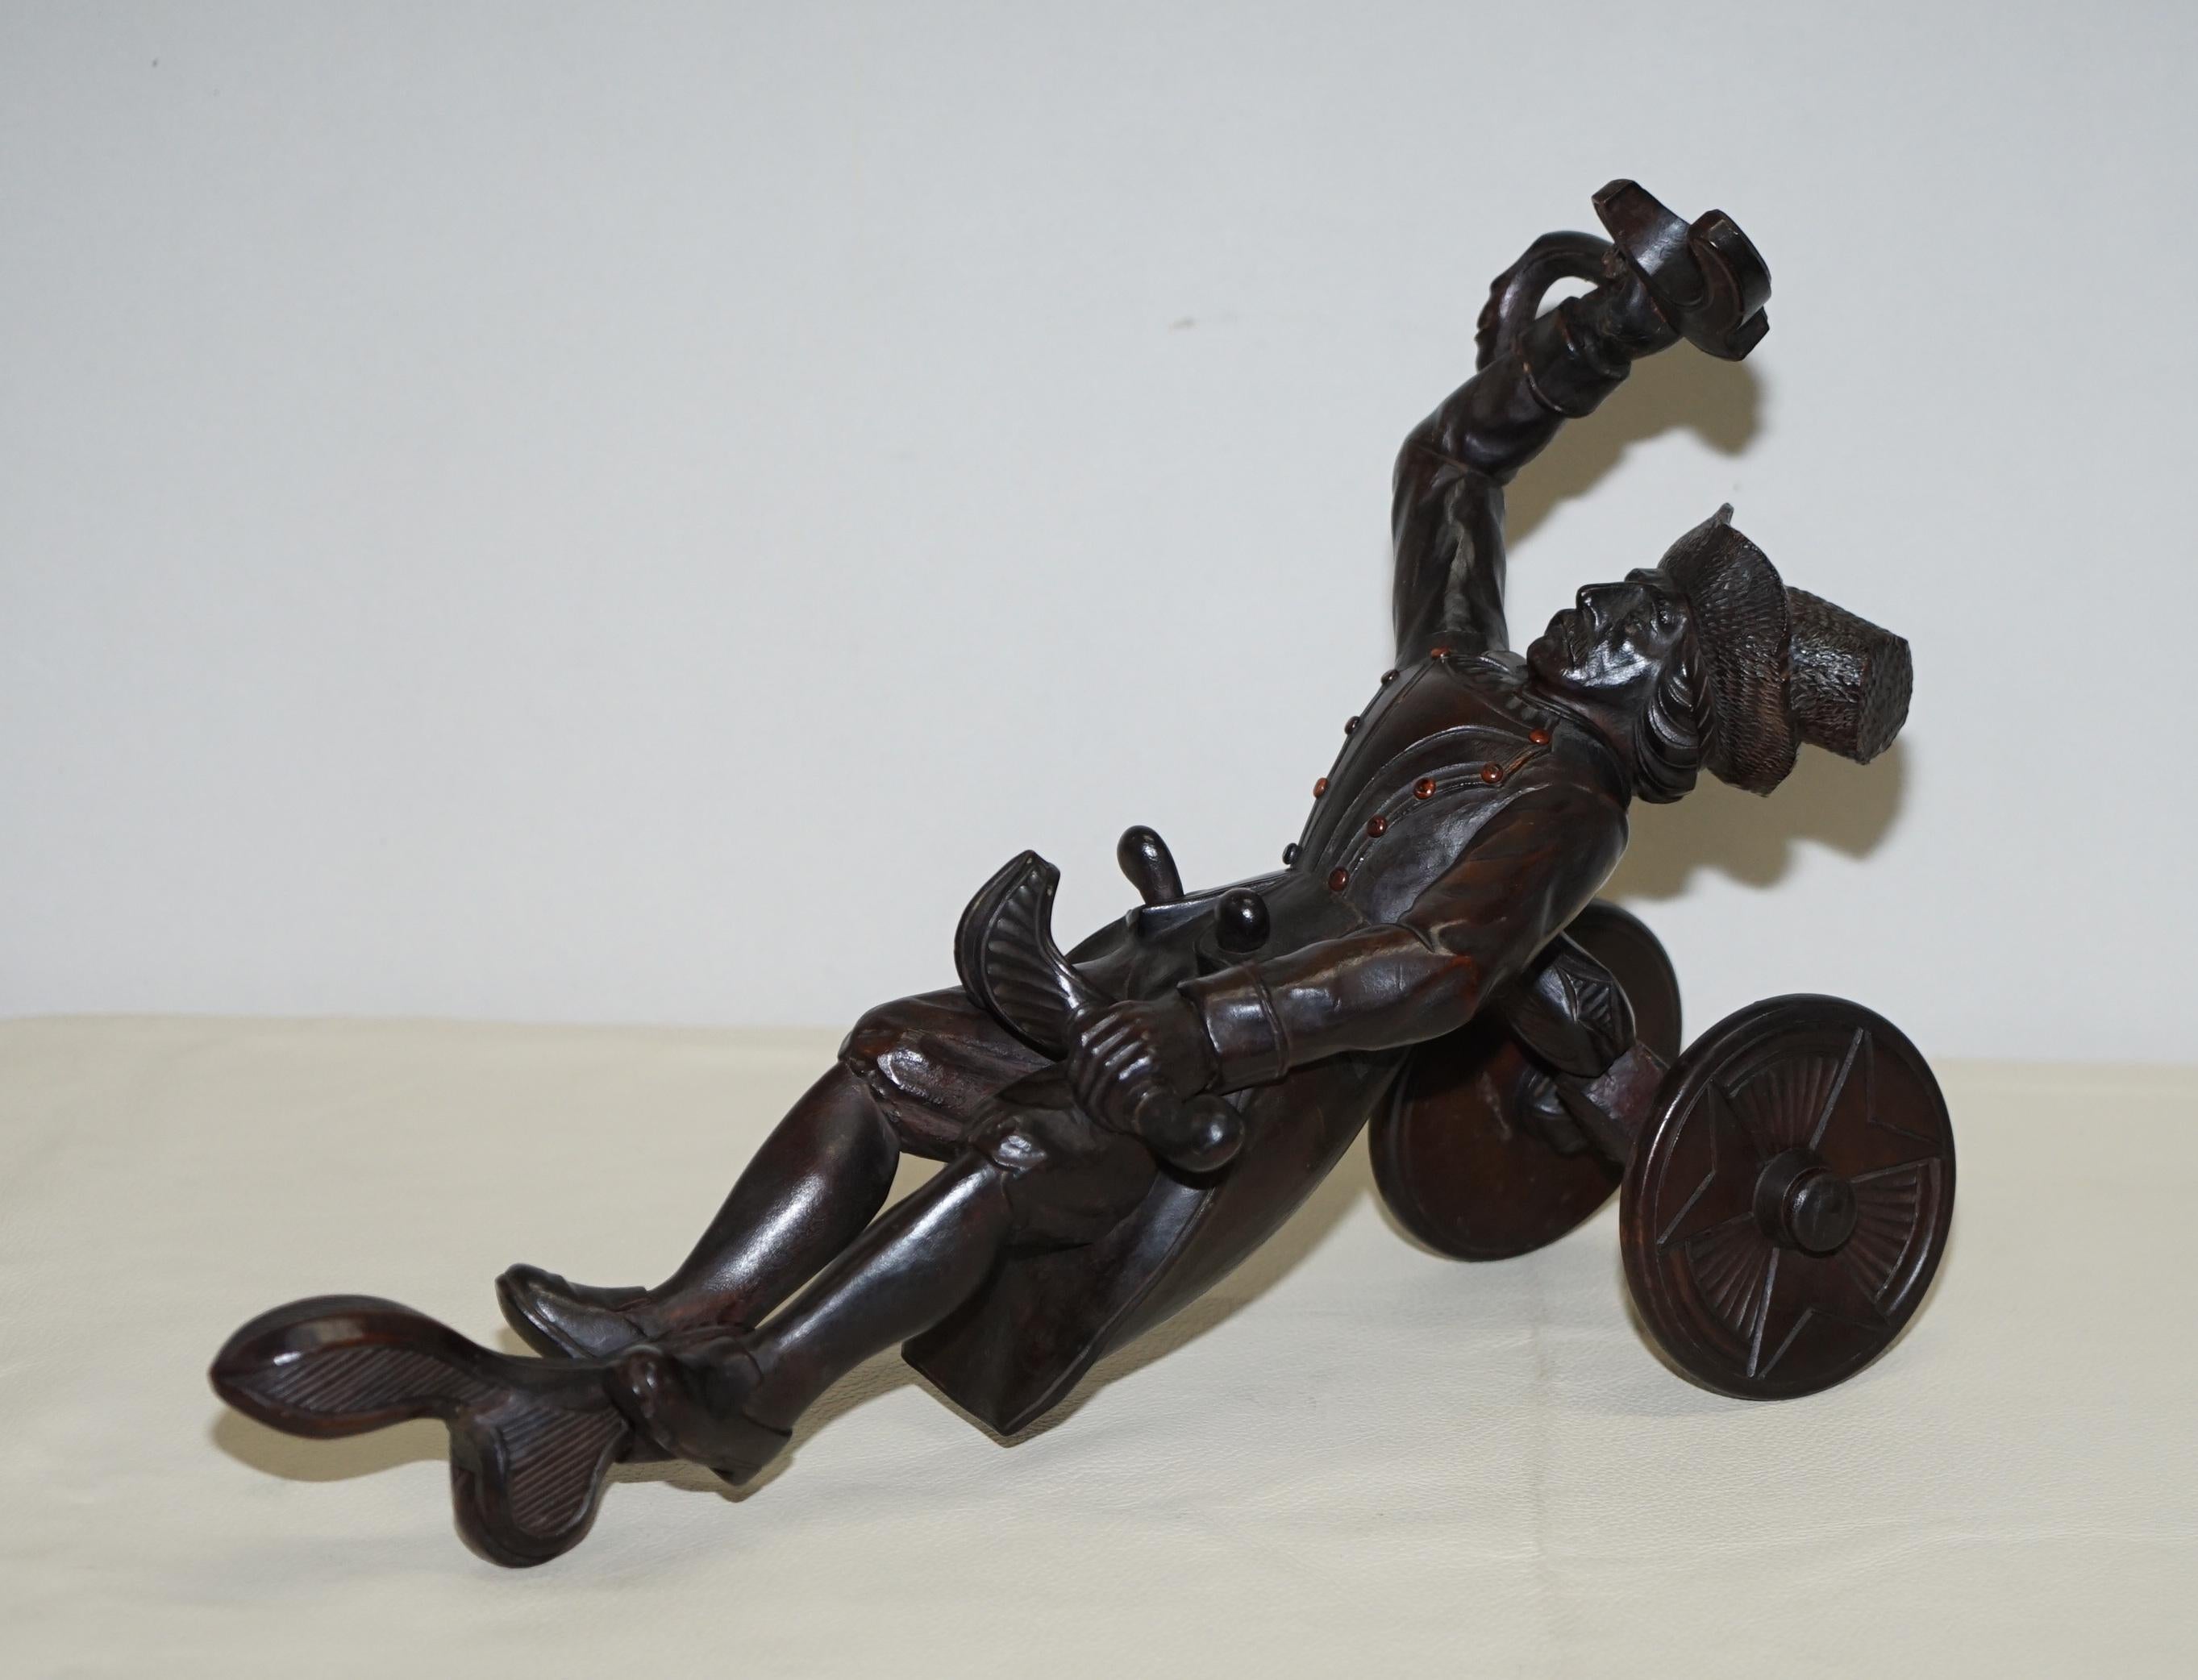 We are delighted to offer for sale this absolutely lovely original circa 1880 Black forest carved wine bottle holder

A very good looking and decorative piece of folk art from the black forest, its been made to hold a bottle of wine that you can